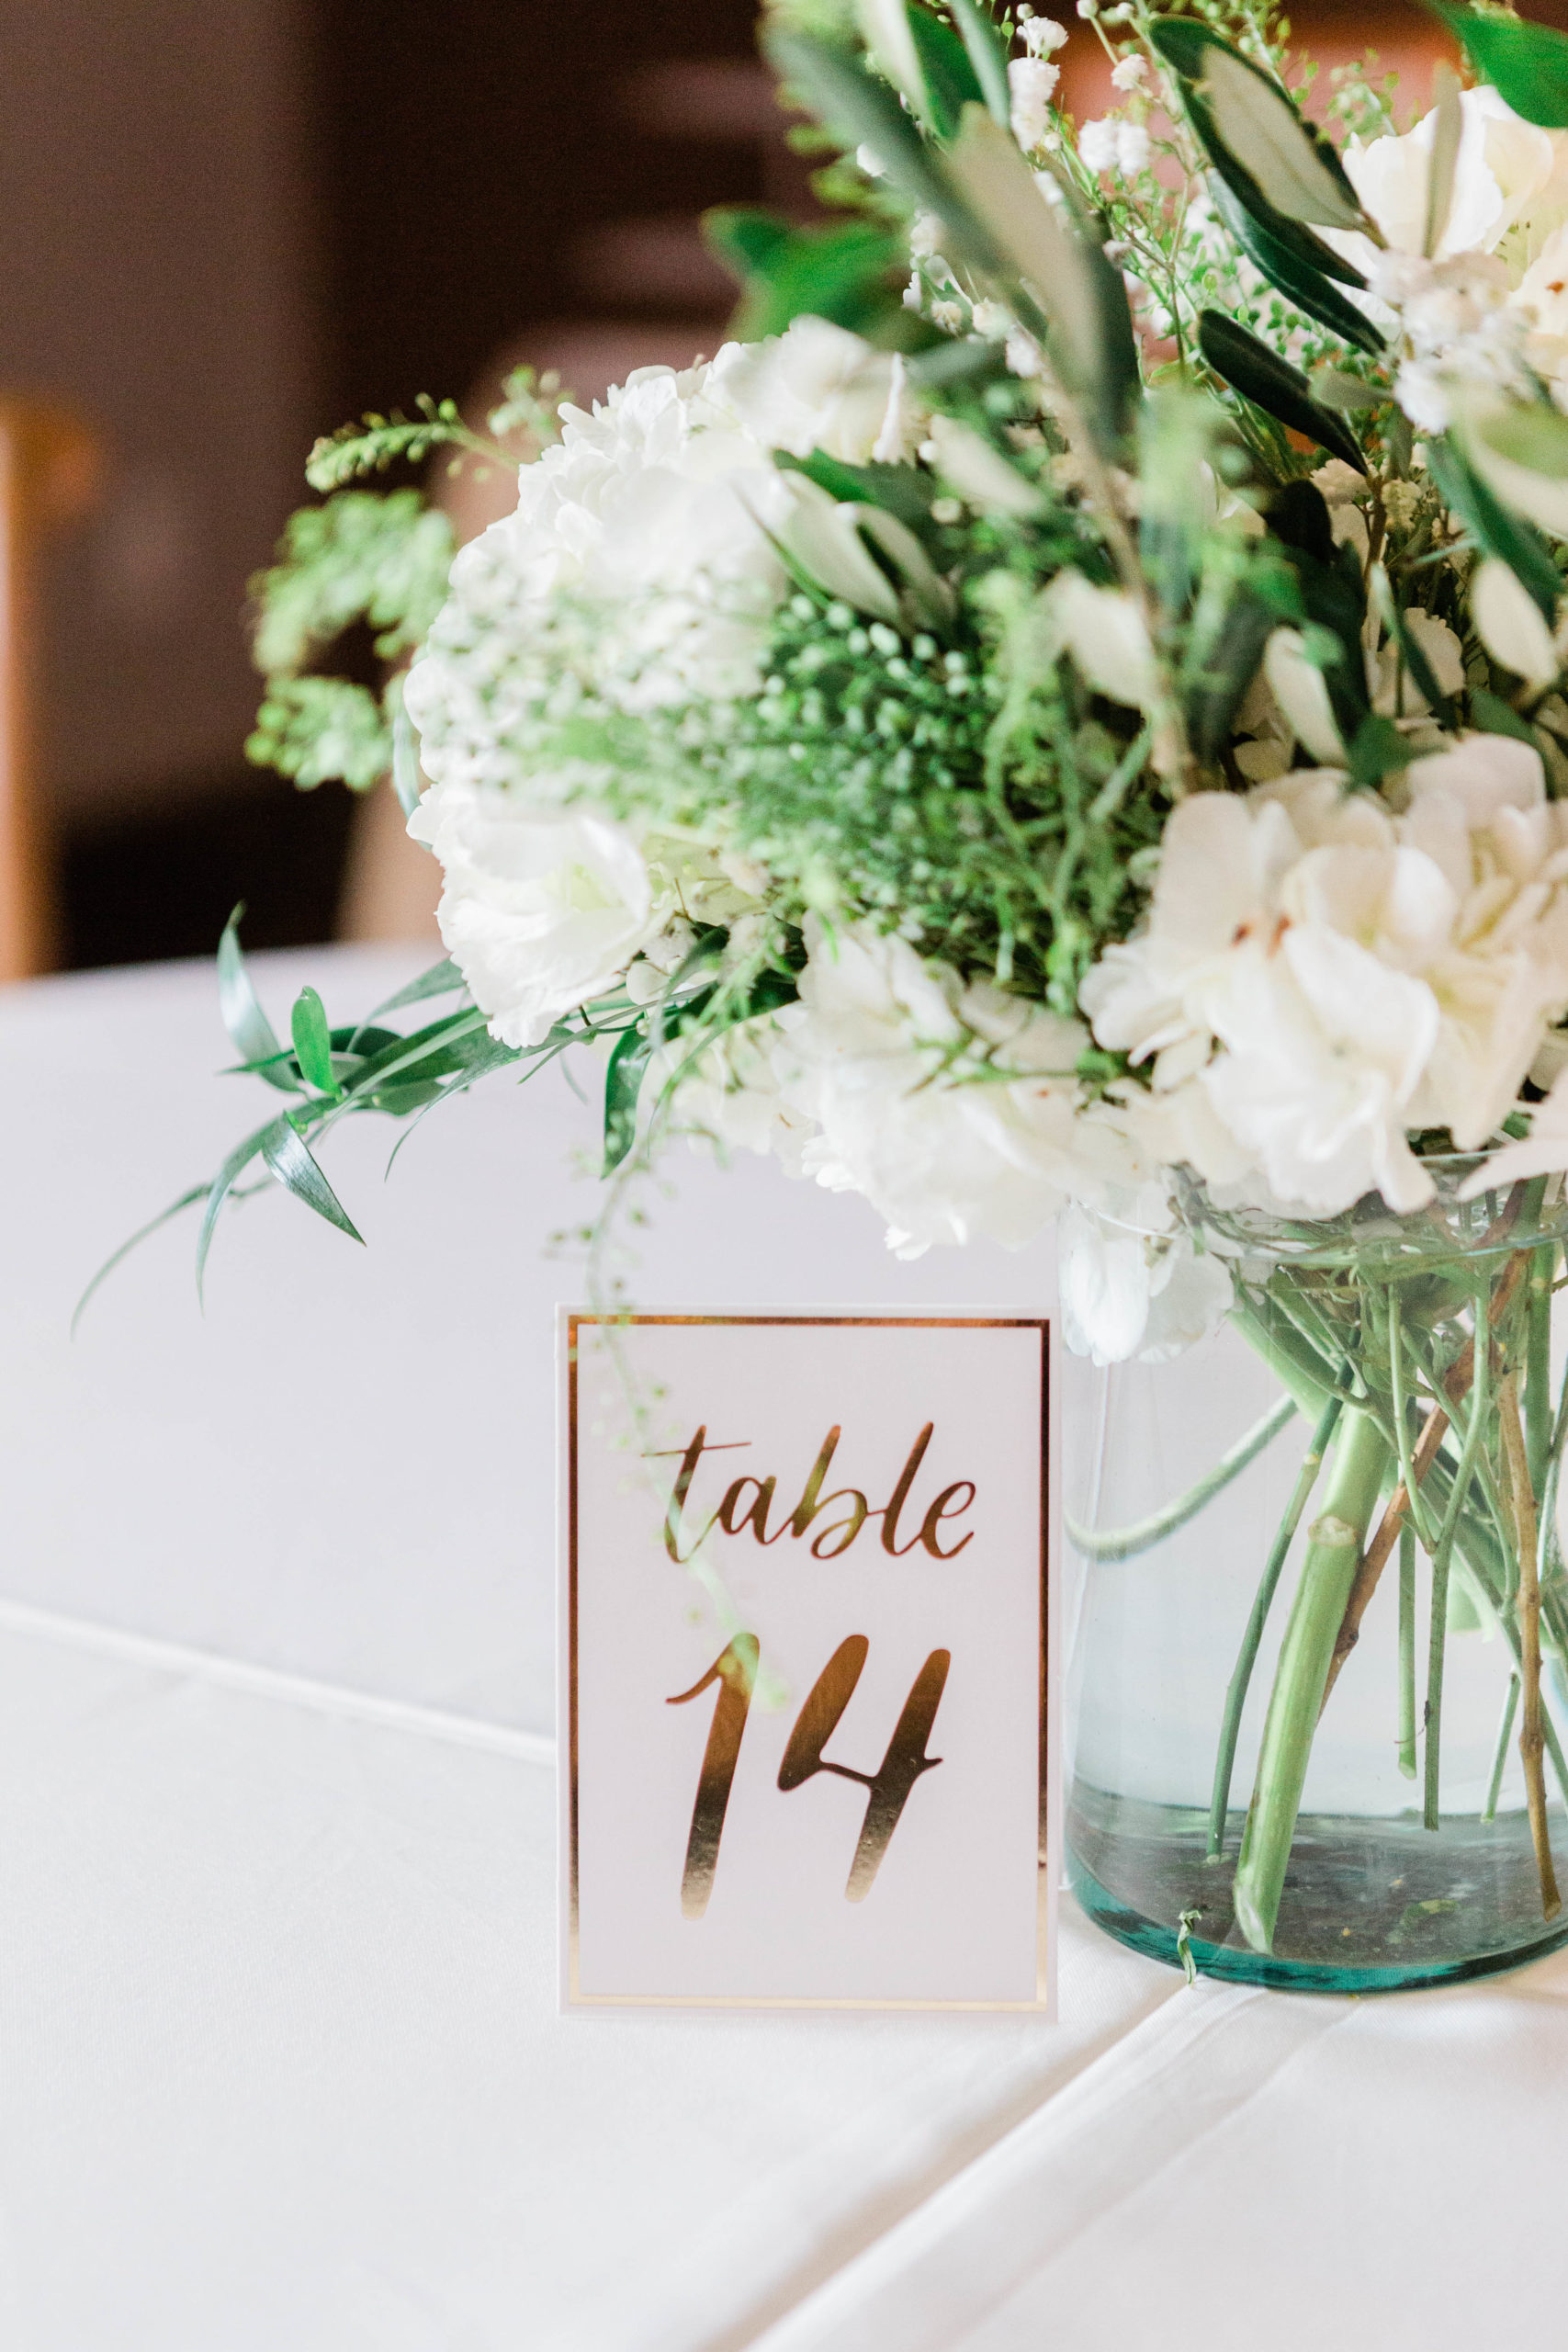 Table number and white florals for reception decor